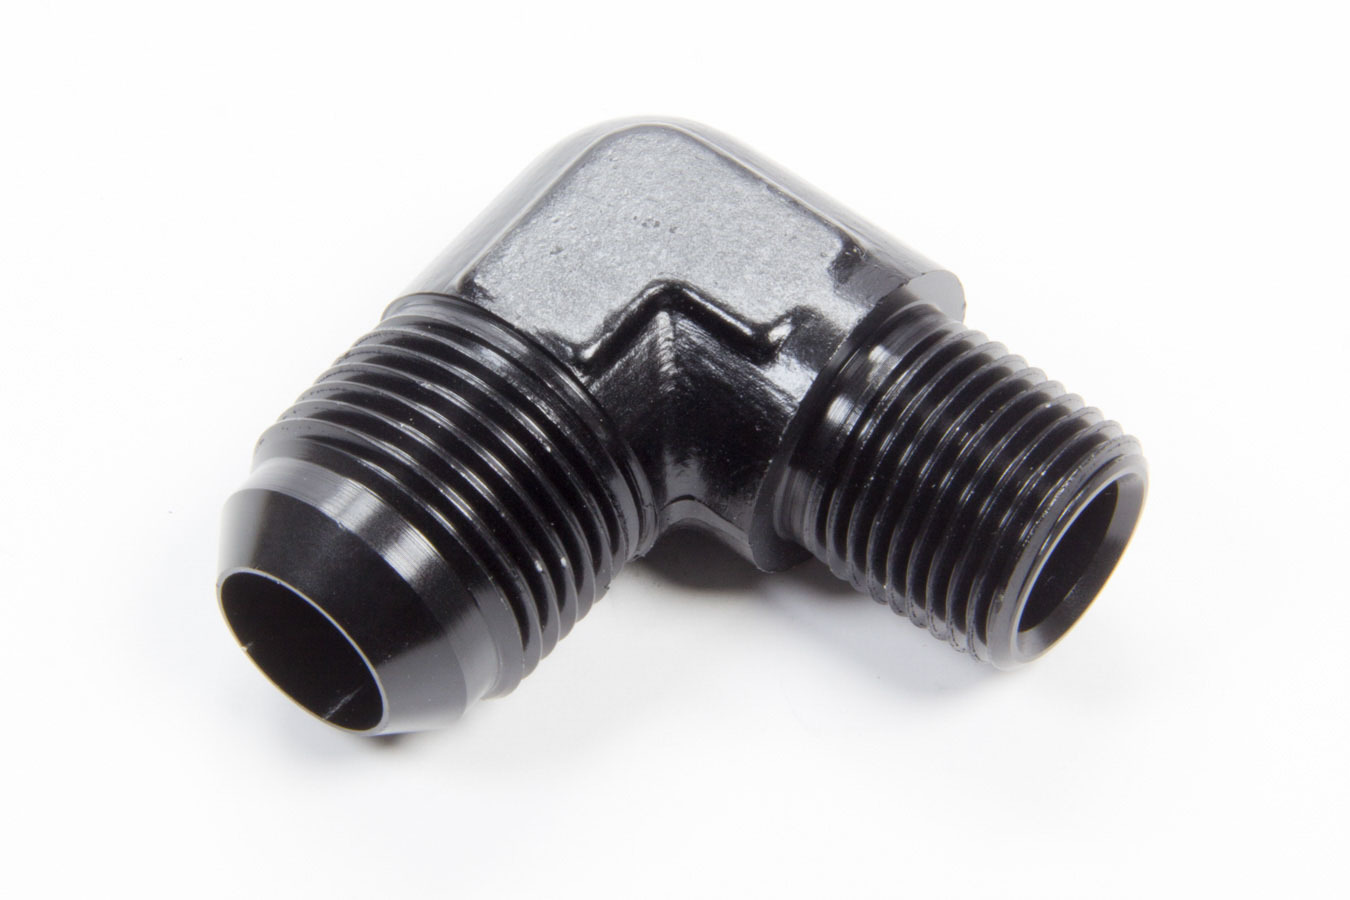 Aeroquip FCM5017 Fitting, Adapter, 90 Degree, 12 AN Male to 1/2 in NPT Male, Aluminum, Black Anodized, Each